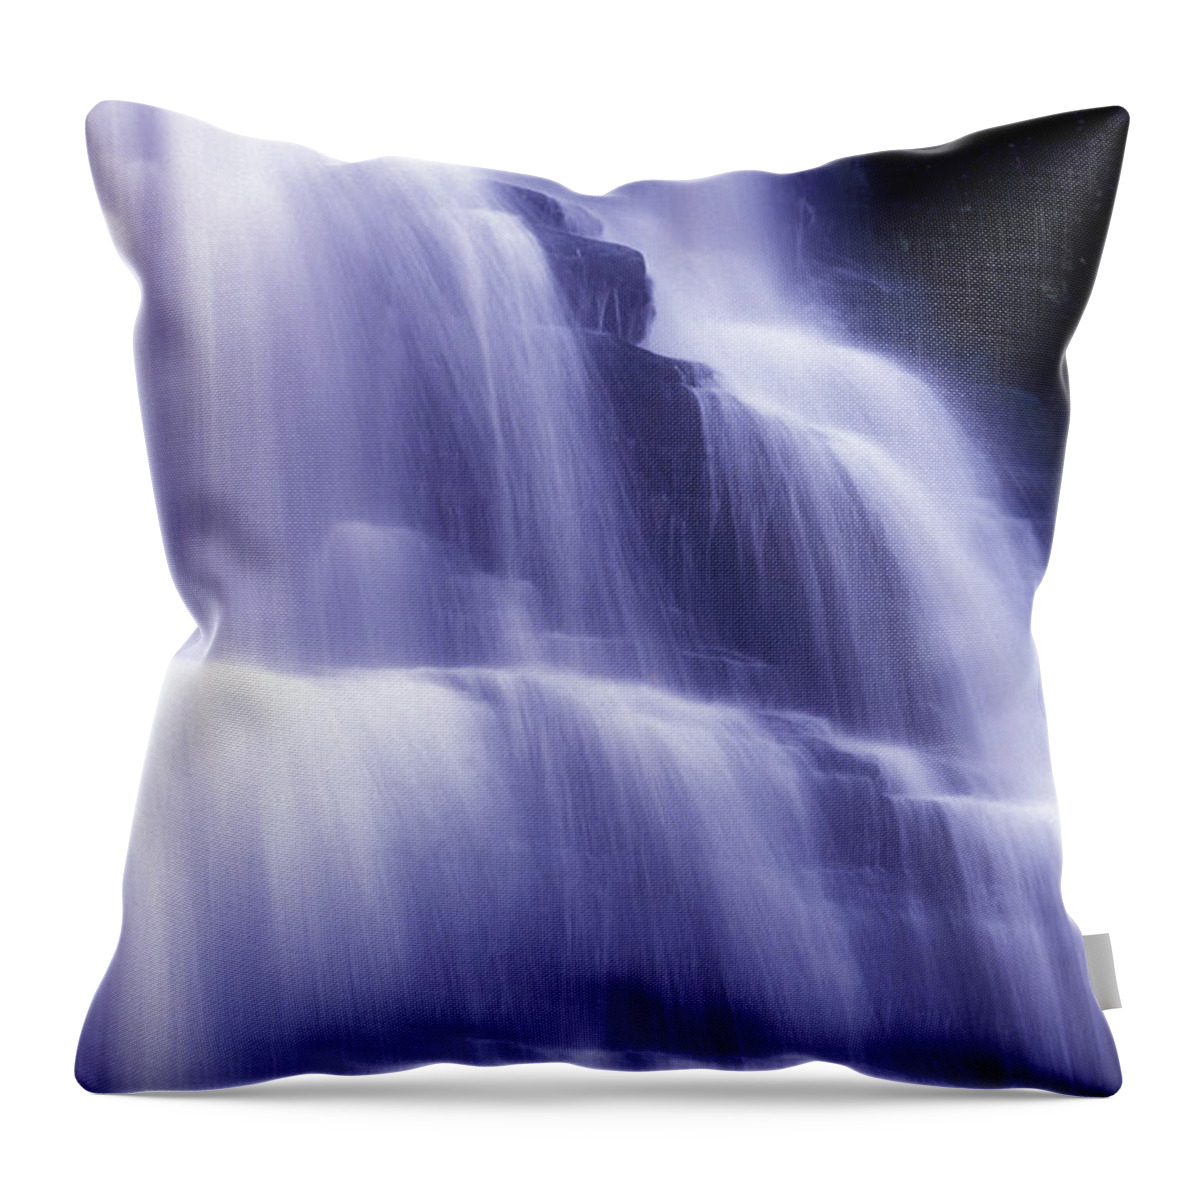 Water Throw Pillow featuring the photograph Blue Falls by Paul W Faust - Impressions of Light